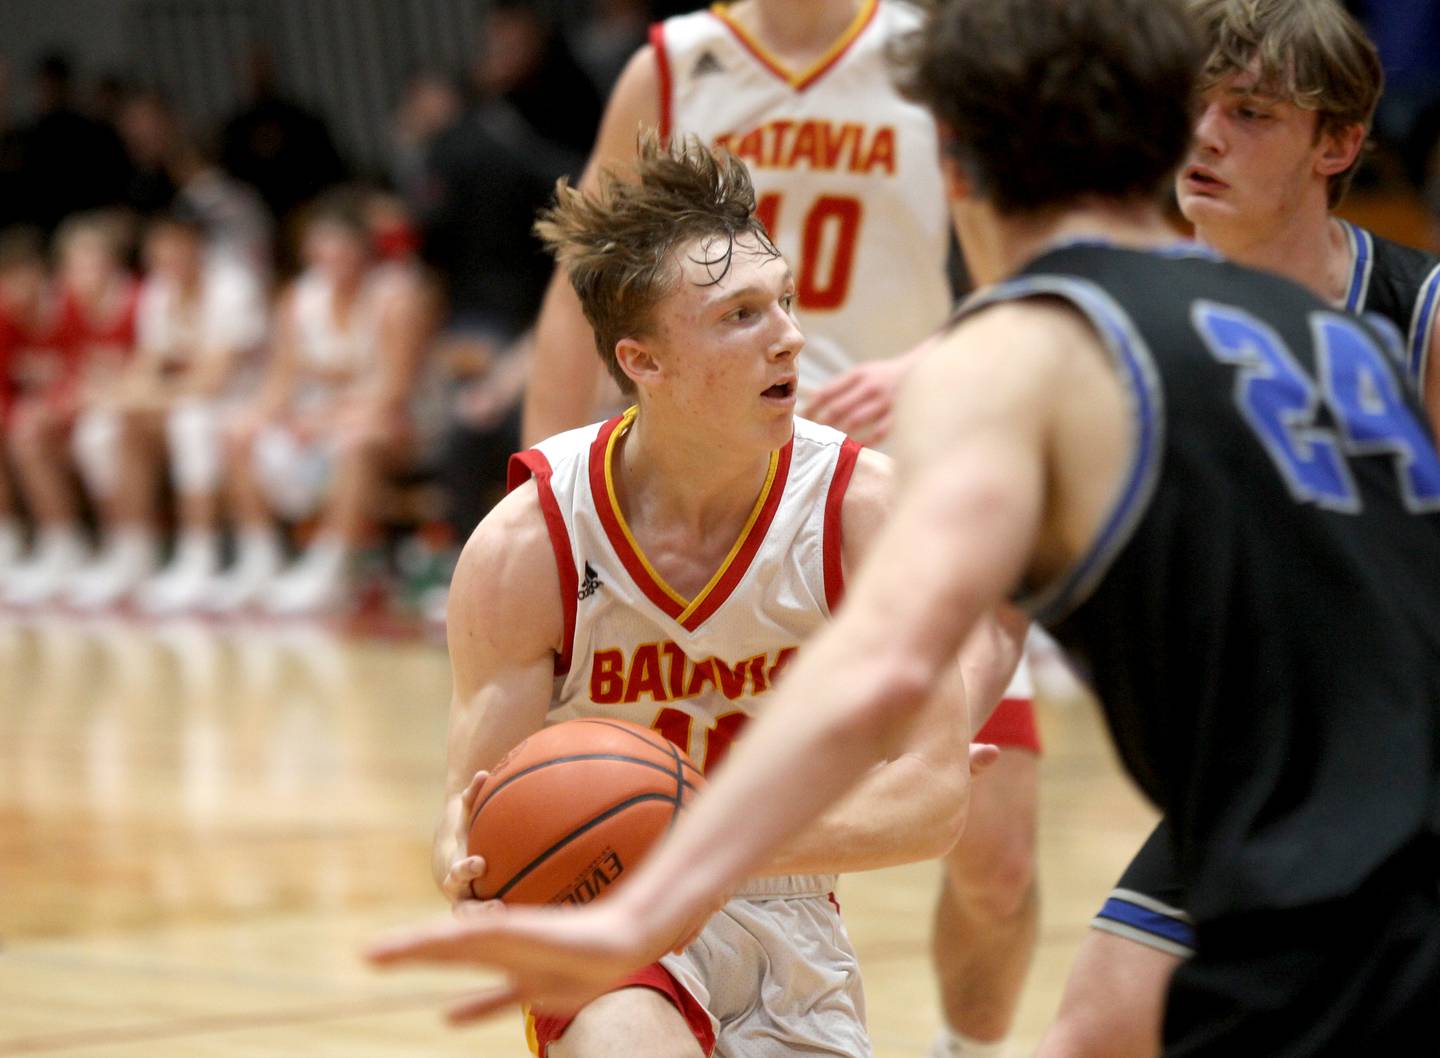 Batavia’s Nate Nazos drives toward the basket during a game against St. Charles North at Batavia on Wednesday, Jan. 11, 2023.